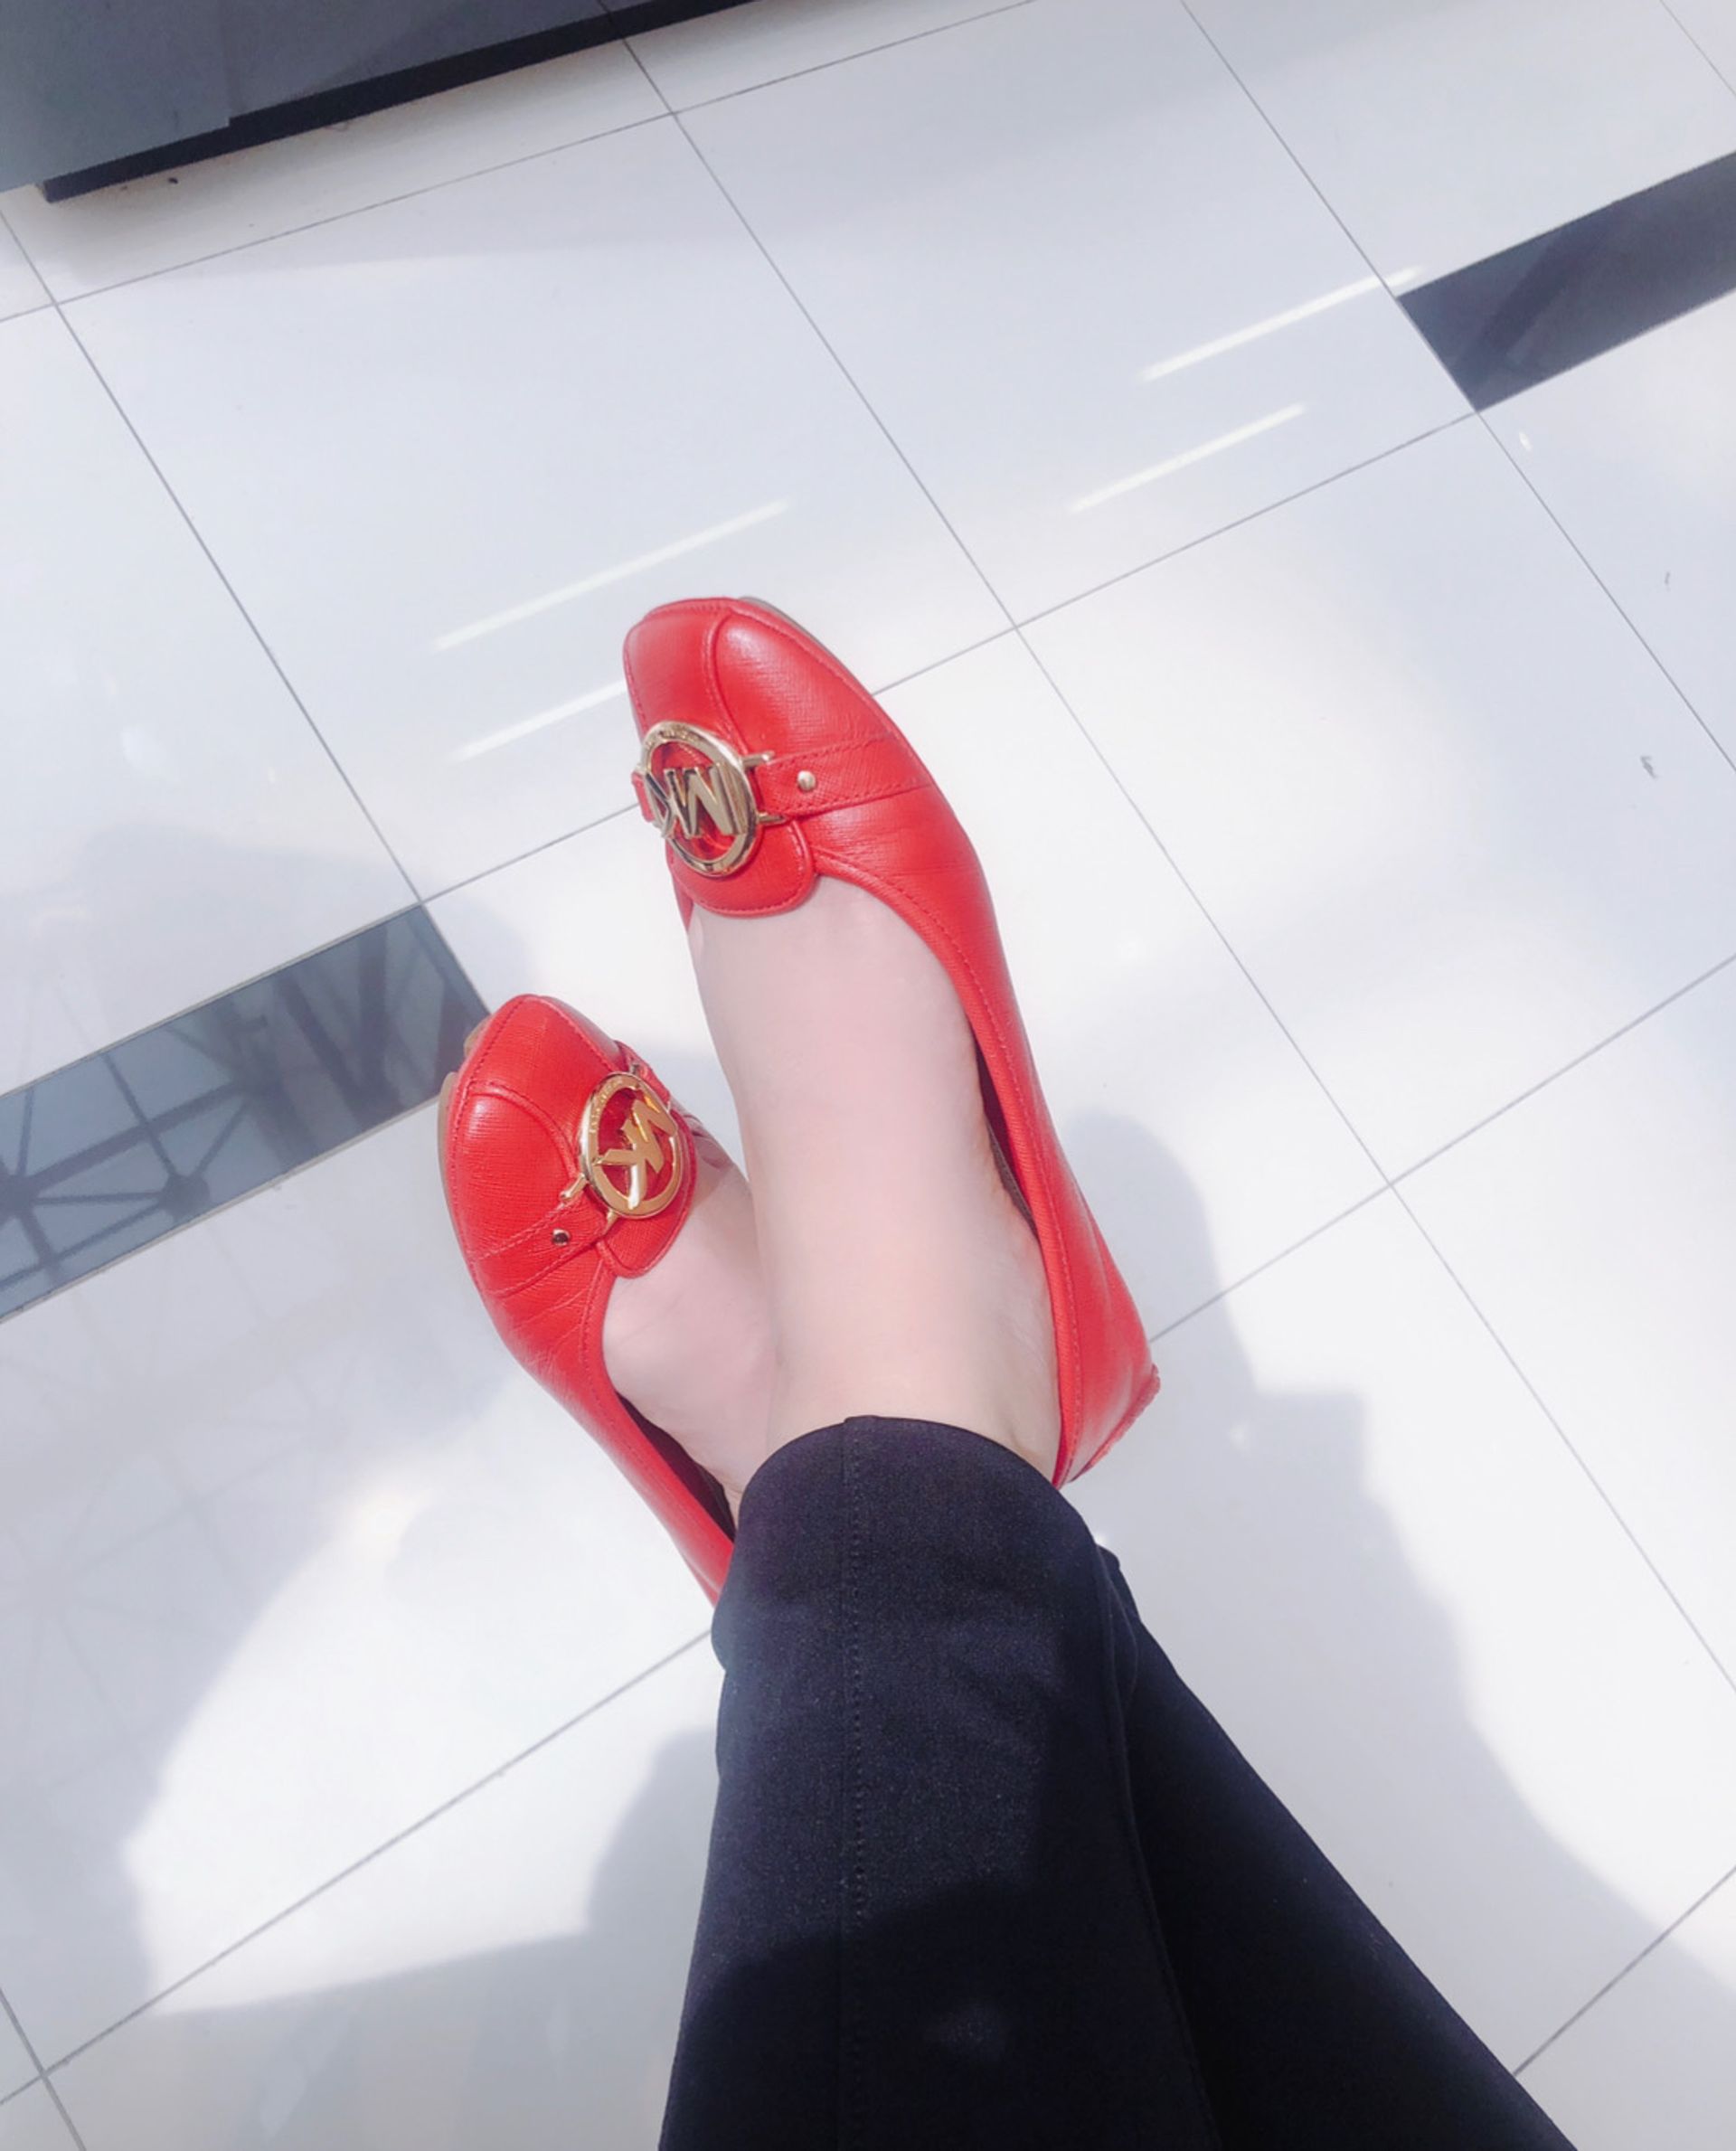 Micheal Kors Red Shoes - Macys Style Crew